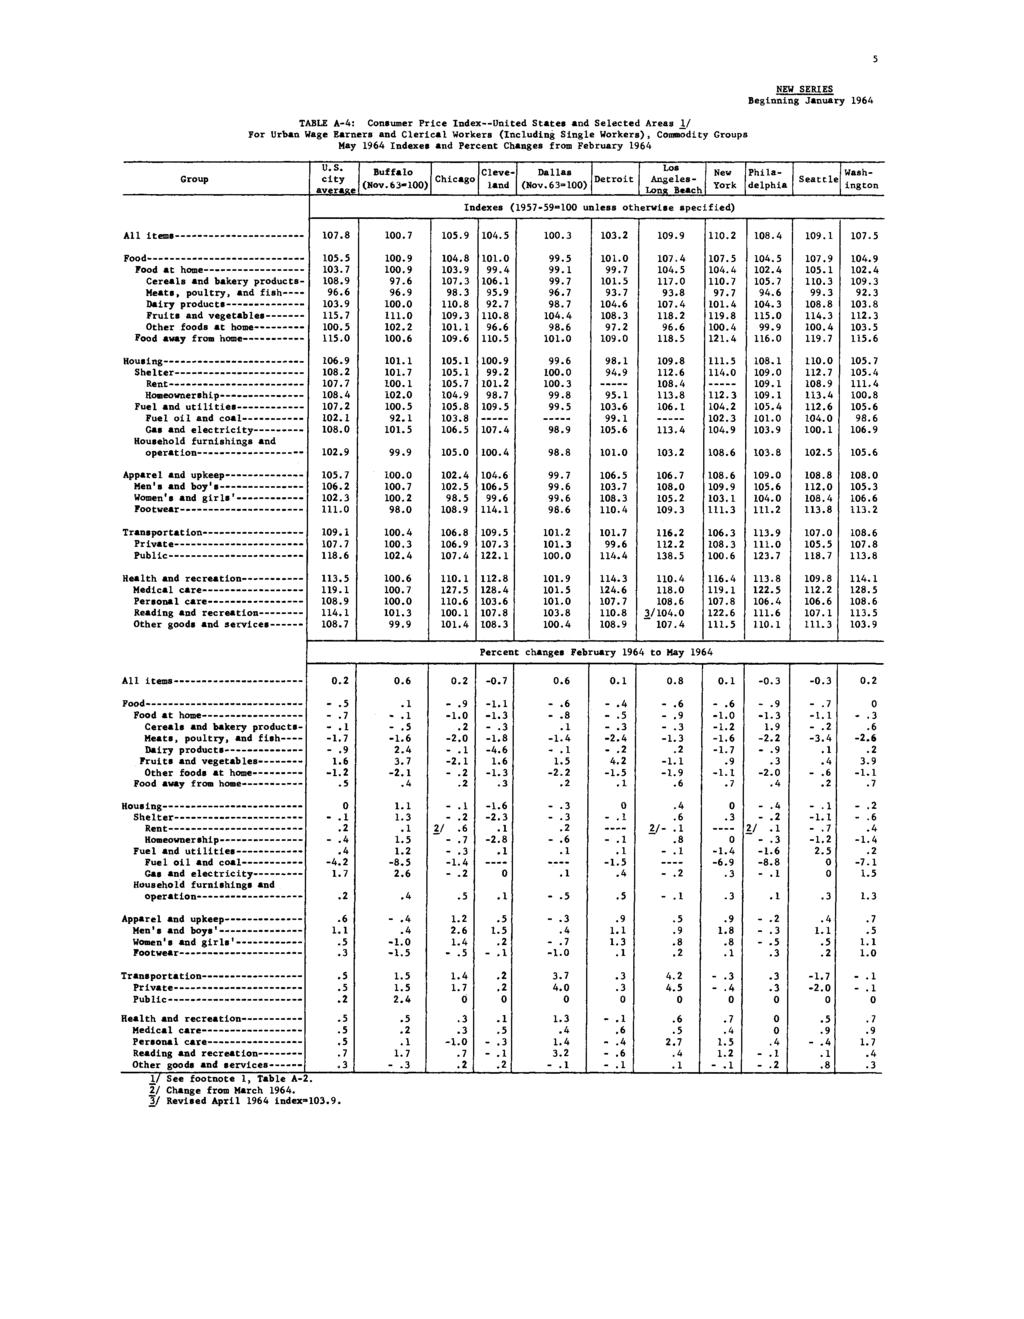 5 TABLE A-4: Consumer Price Index United States and Selected Areas 1/ For Urban Wage Earners and Clerical Workers (Including Single Workers), Commodity Groups Indexes and Percent Changes from